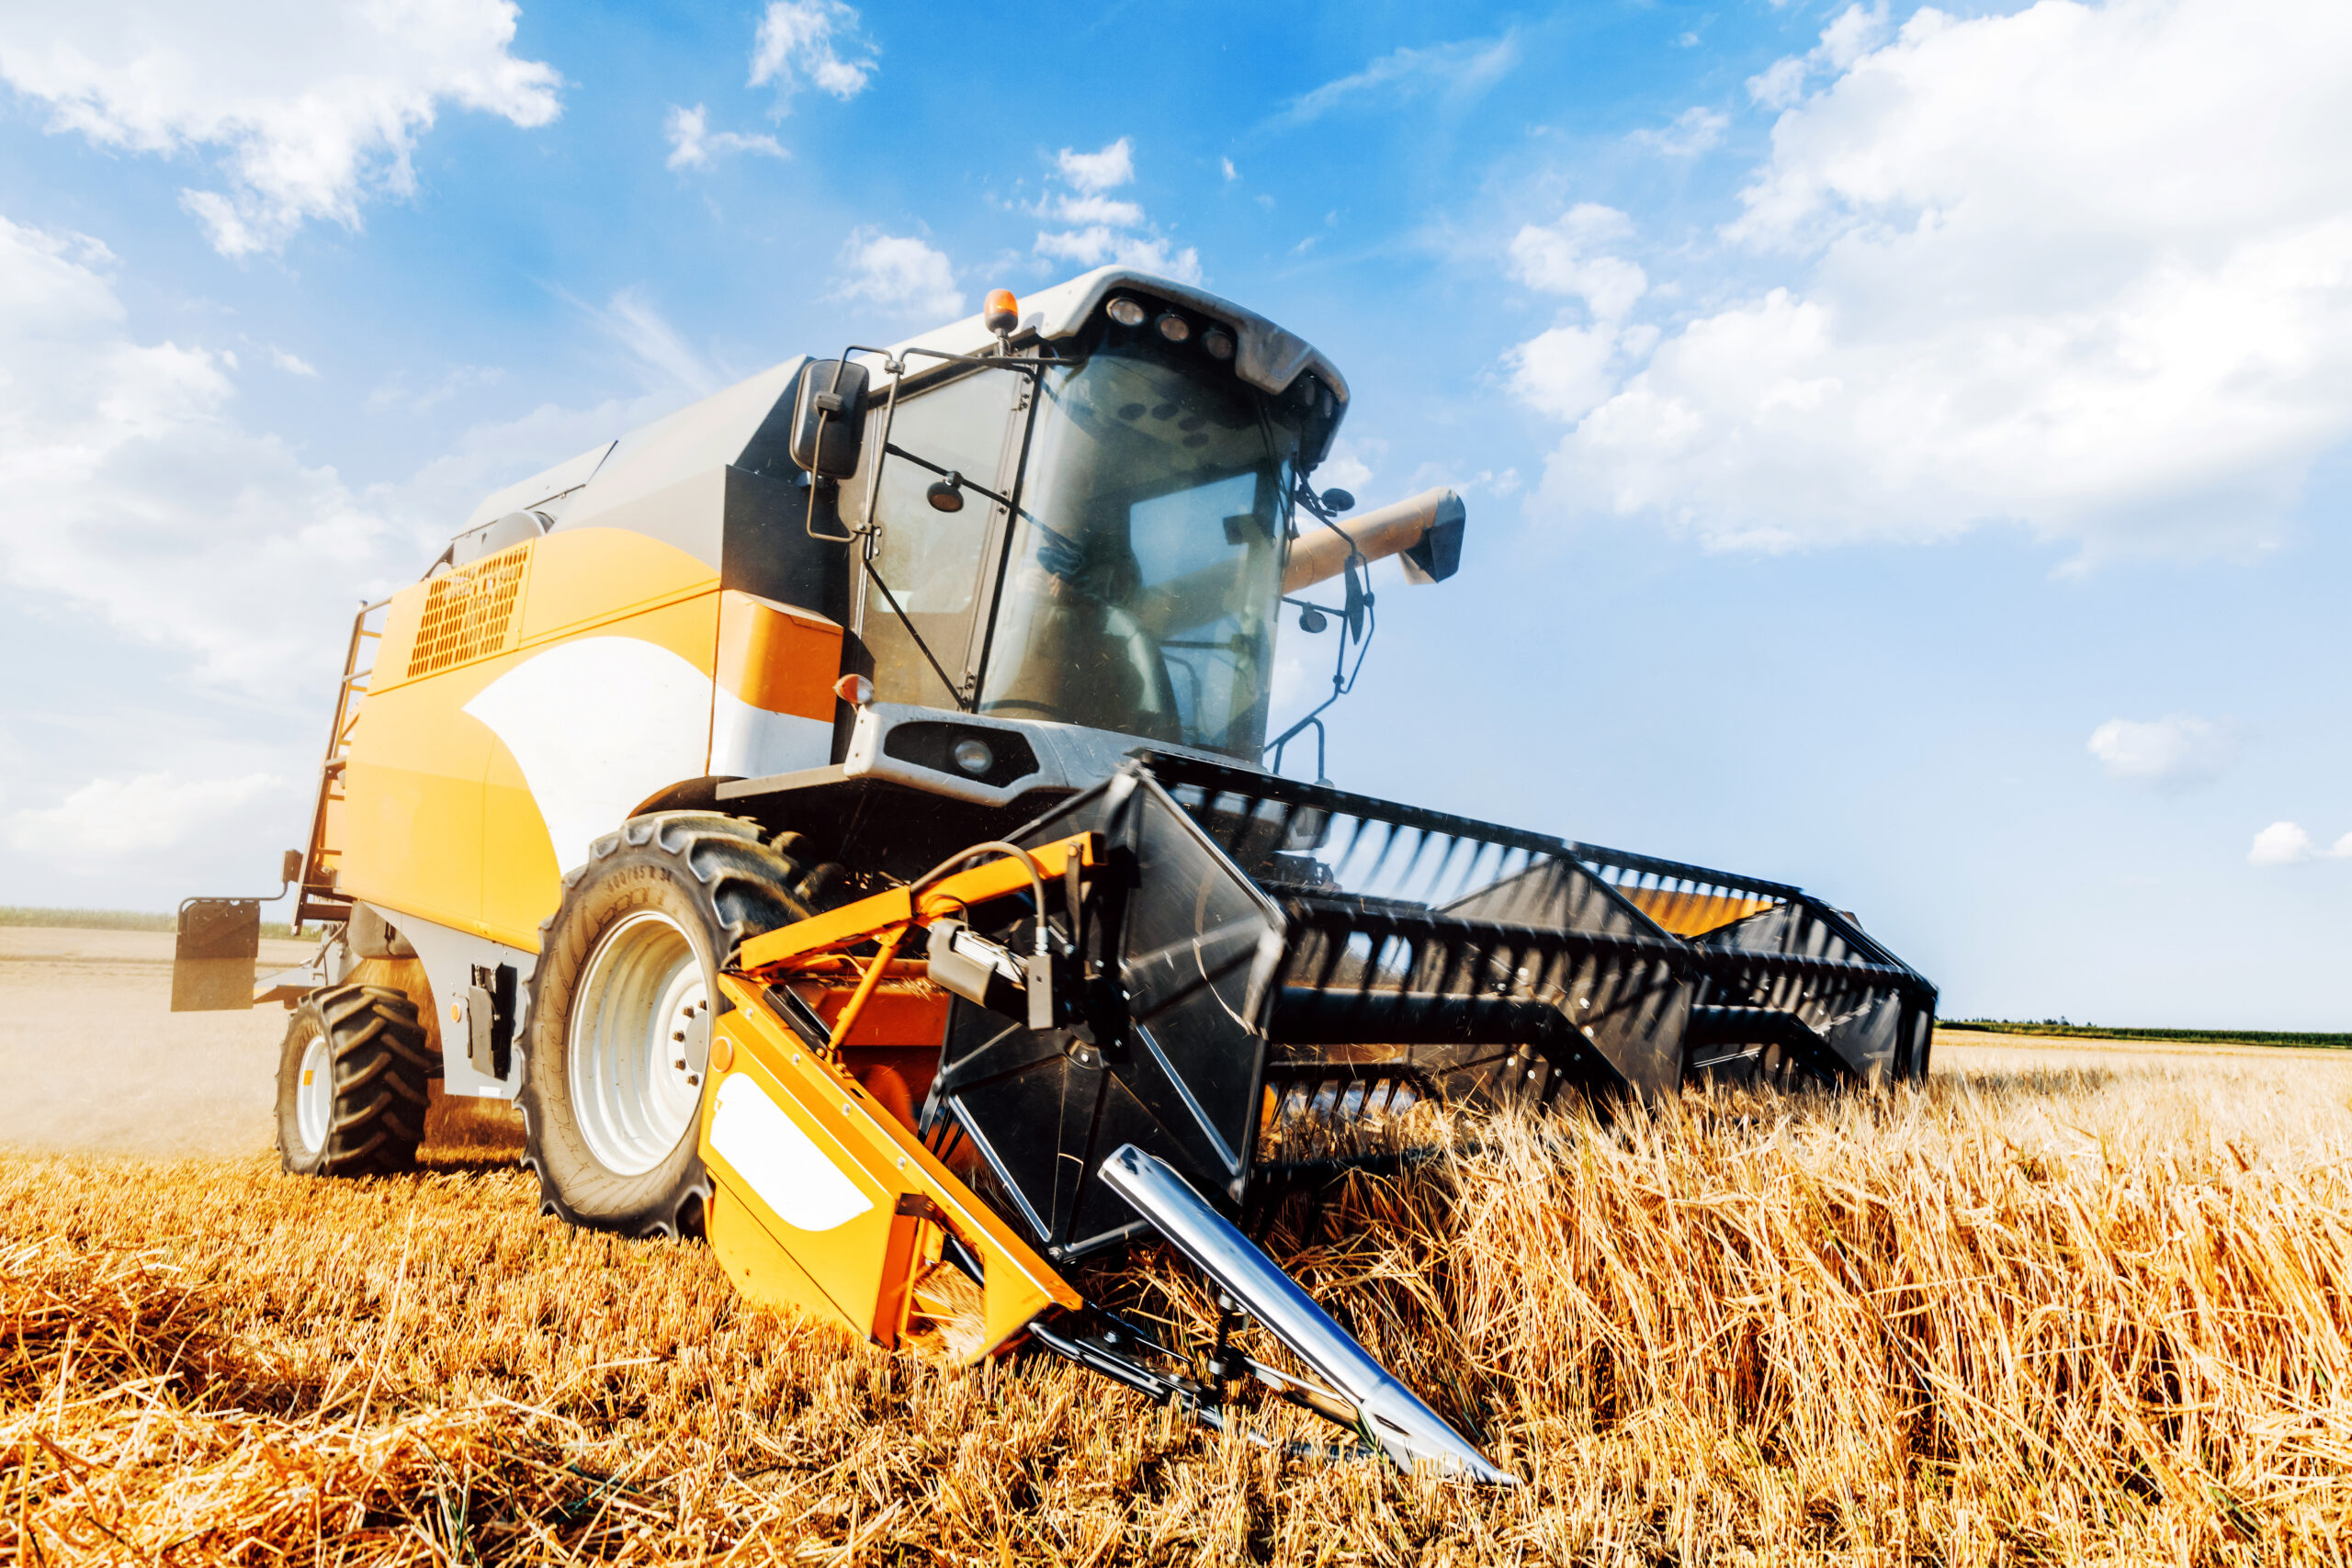 Combine harvesters Agricultural machinery. The machine for harvesting grain crops.